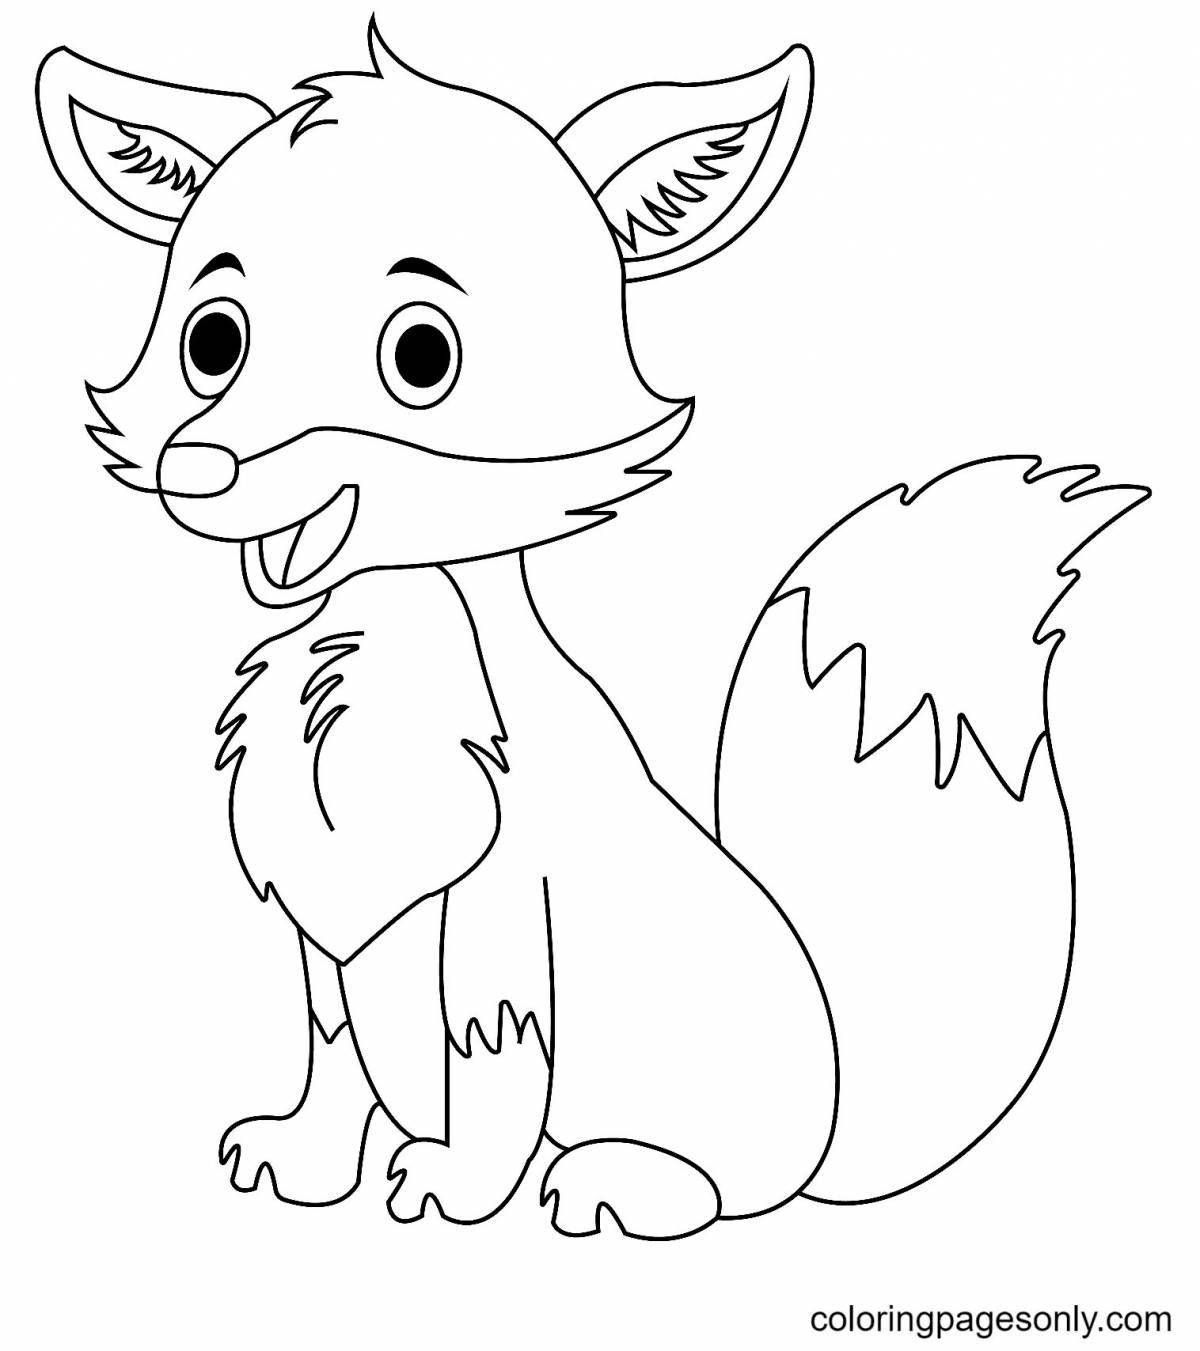 Sweet fox coloring pages for kids